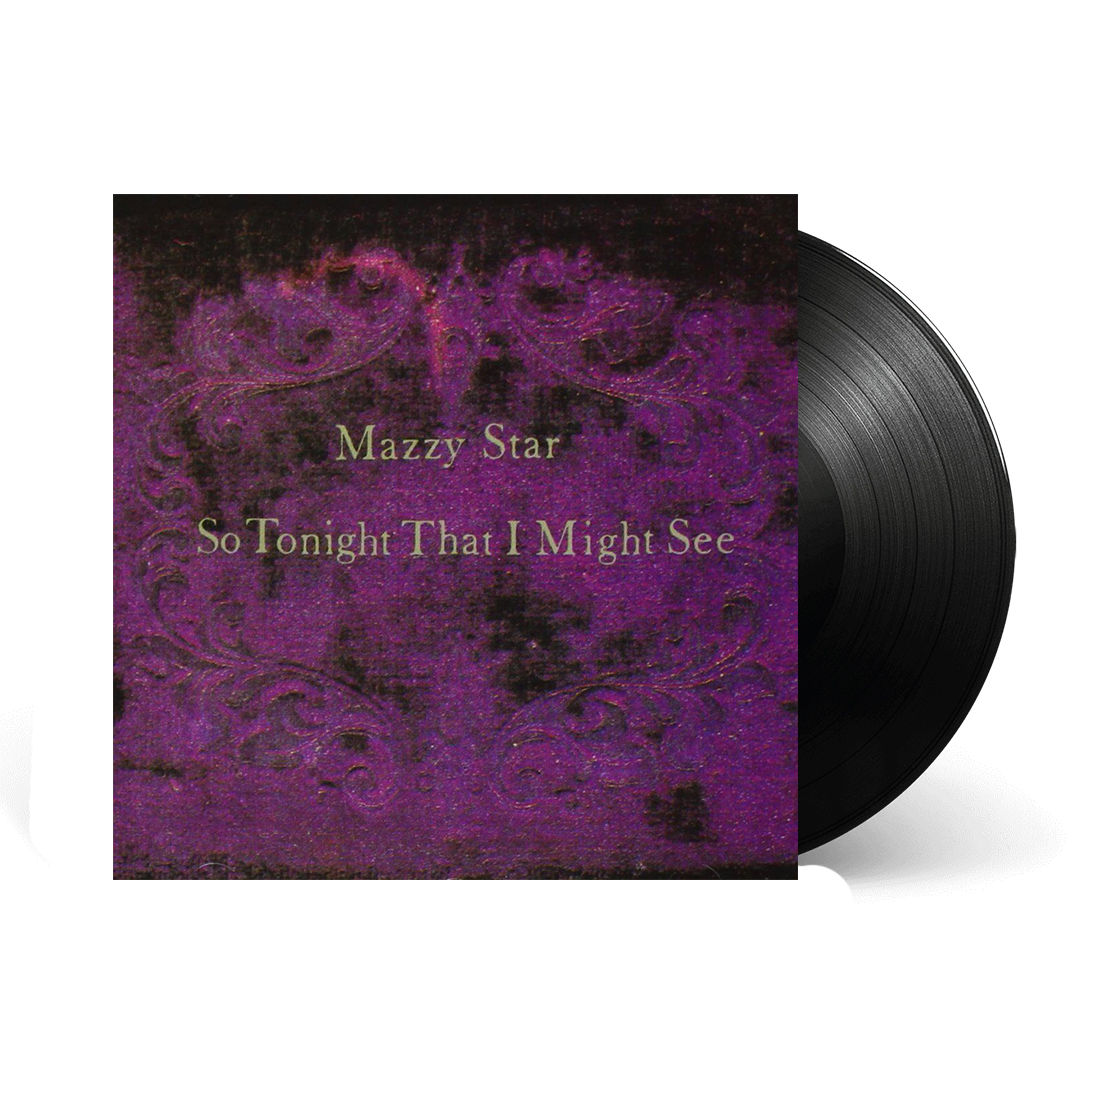 Mazzy Star - So Tonight That I Might See: Vinyl LP 